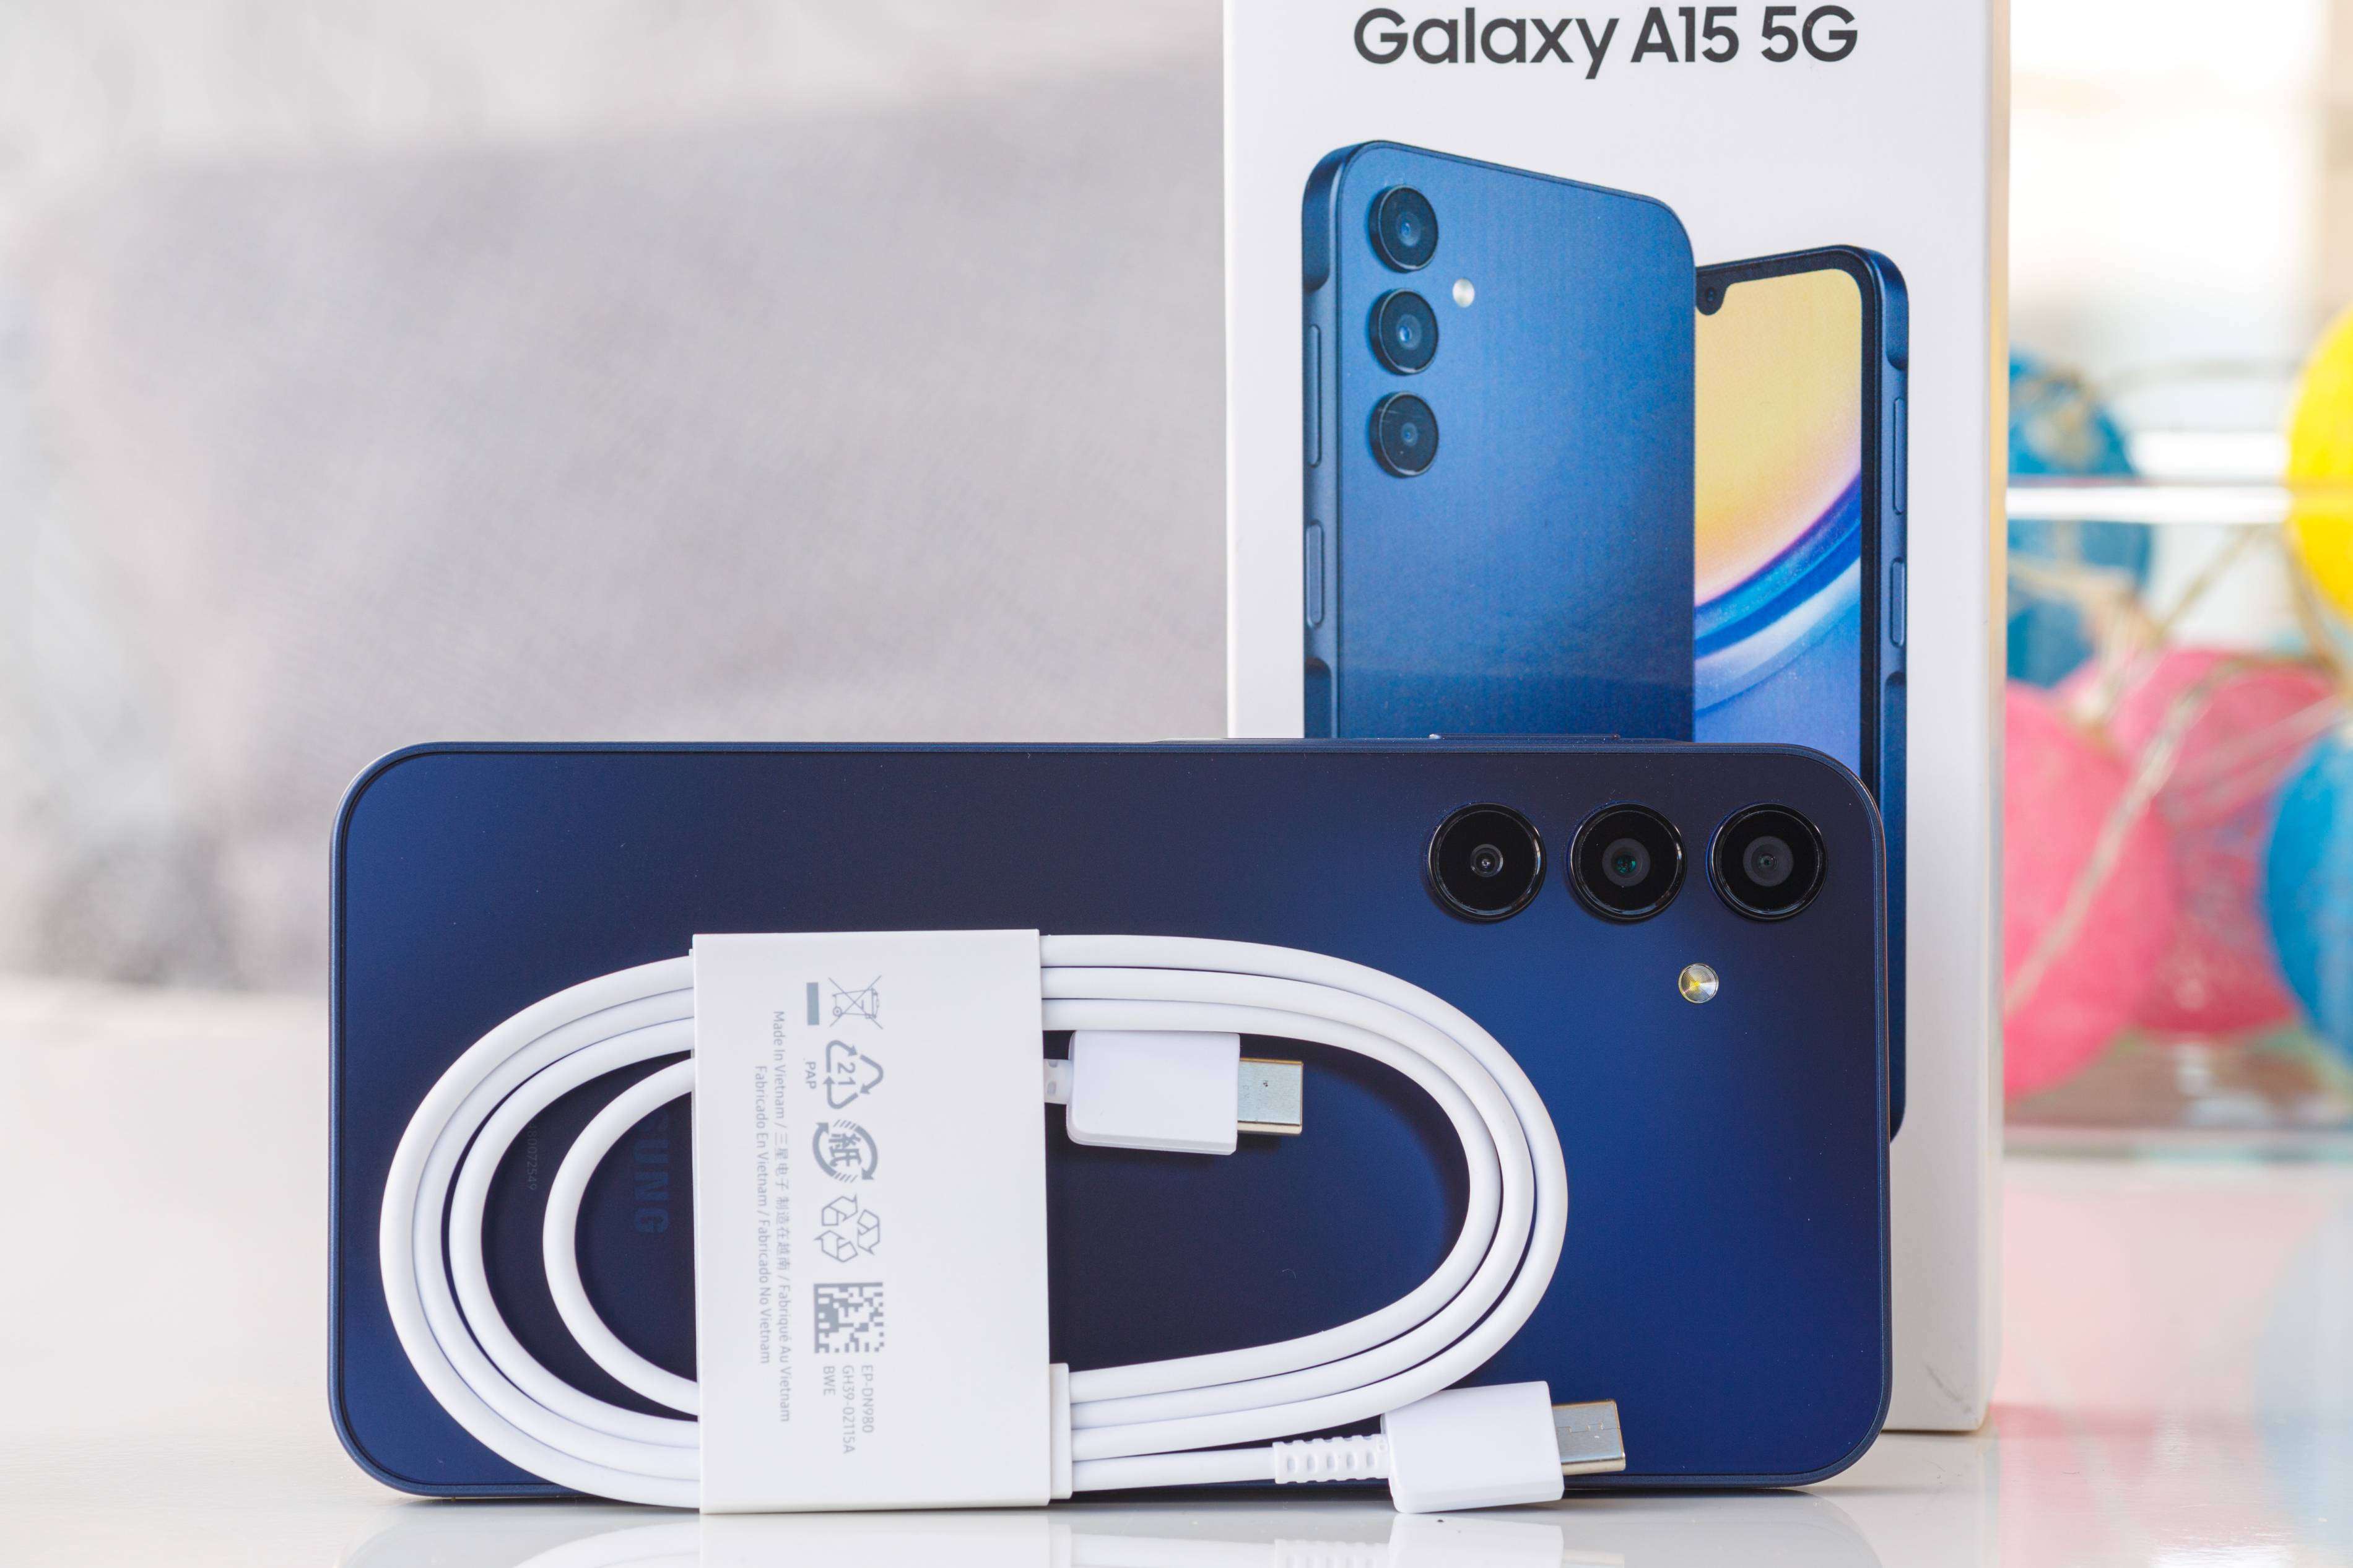 Samsung Galaxy A15 5G in for review